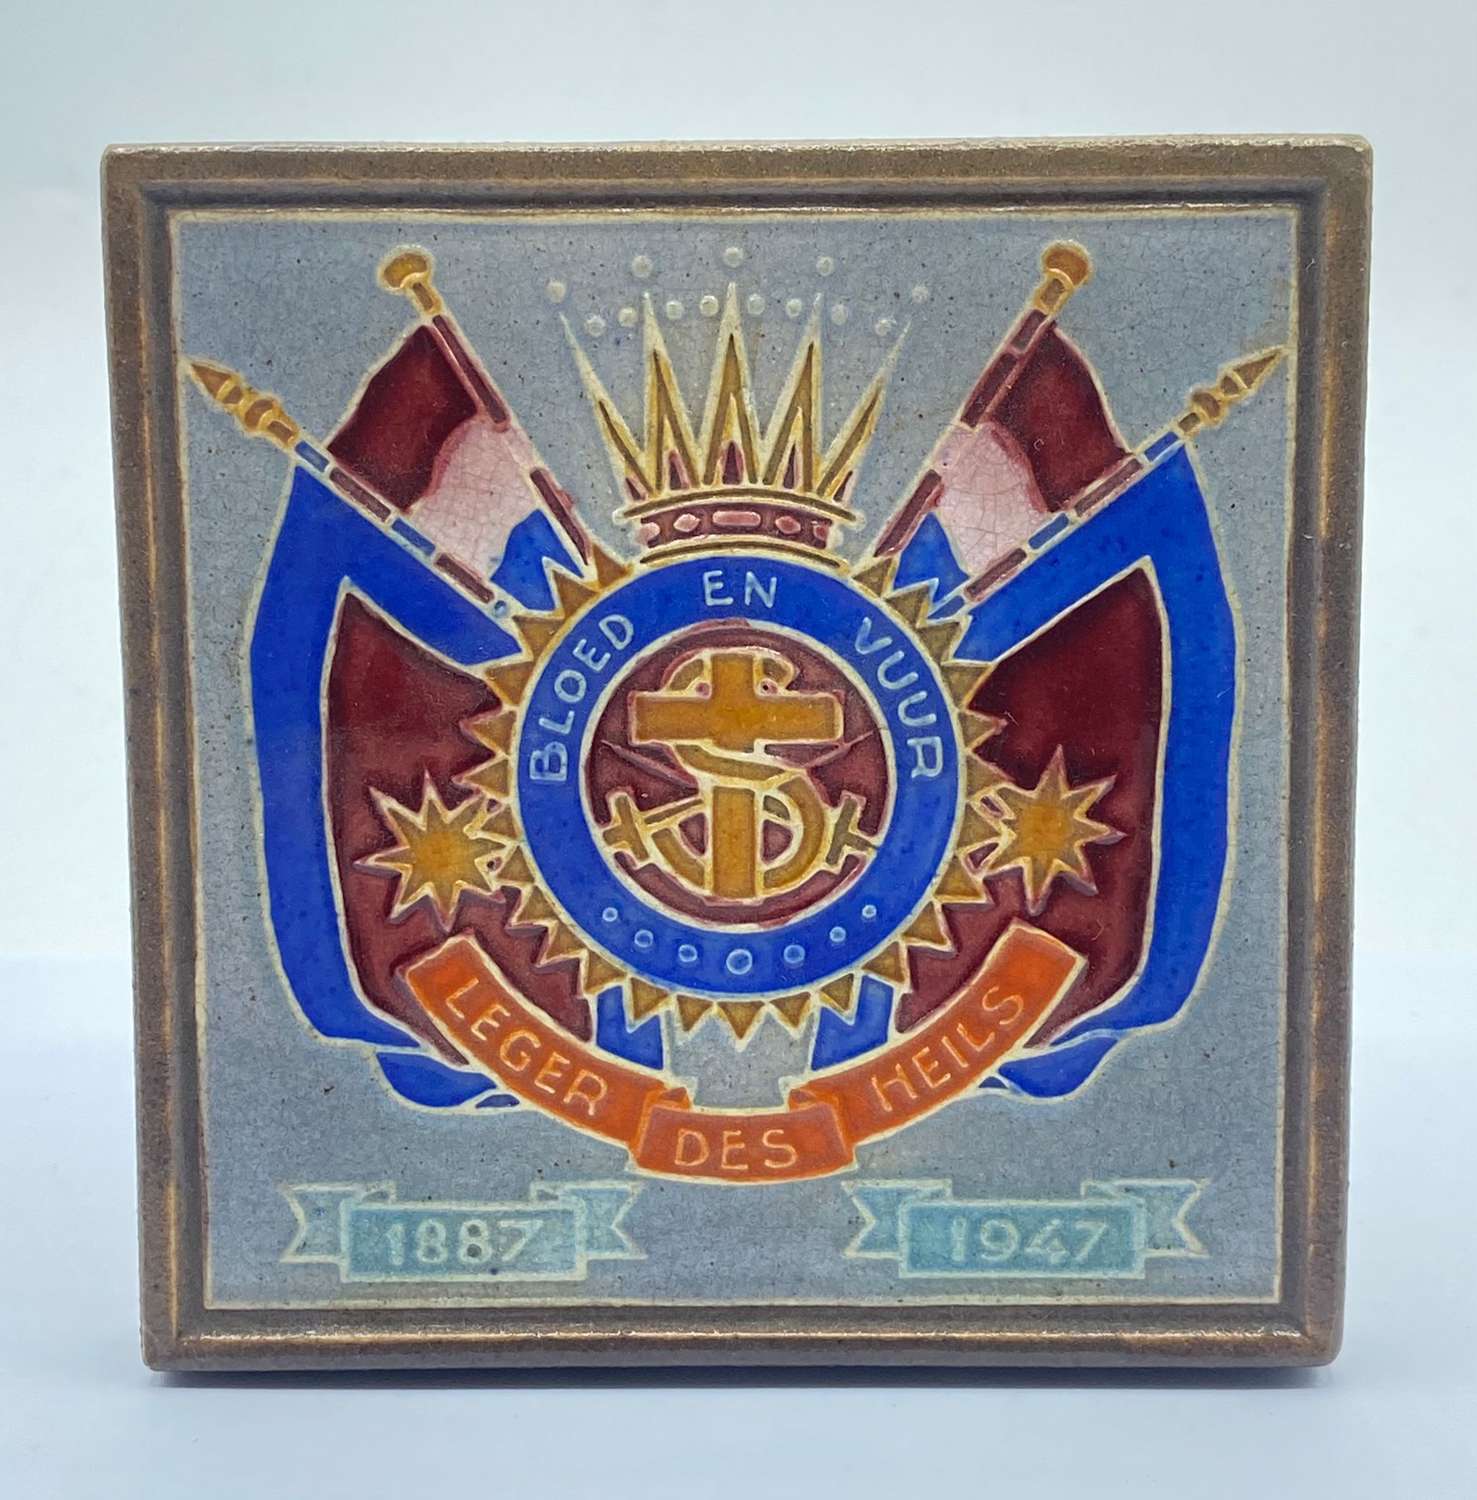 Post WW2 Dutch Salvation Army Blood and Fire 1887 - 1947 Ceramic Tile